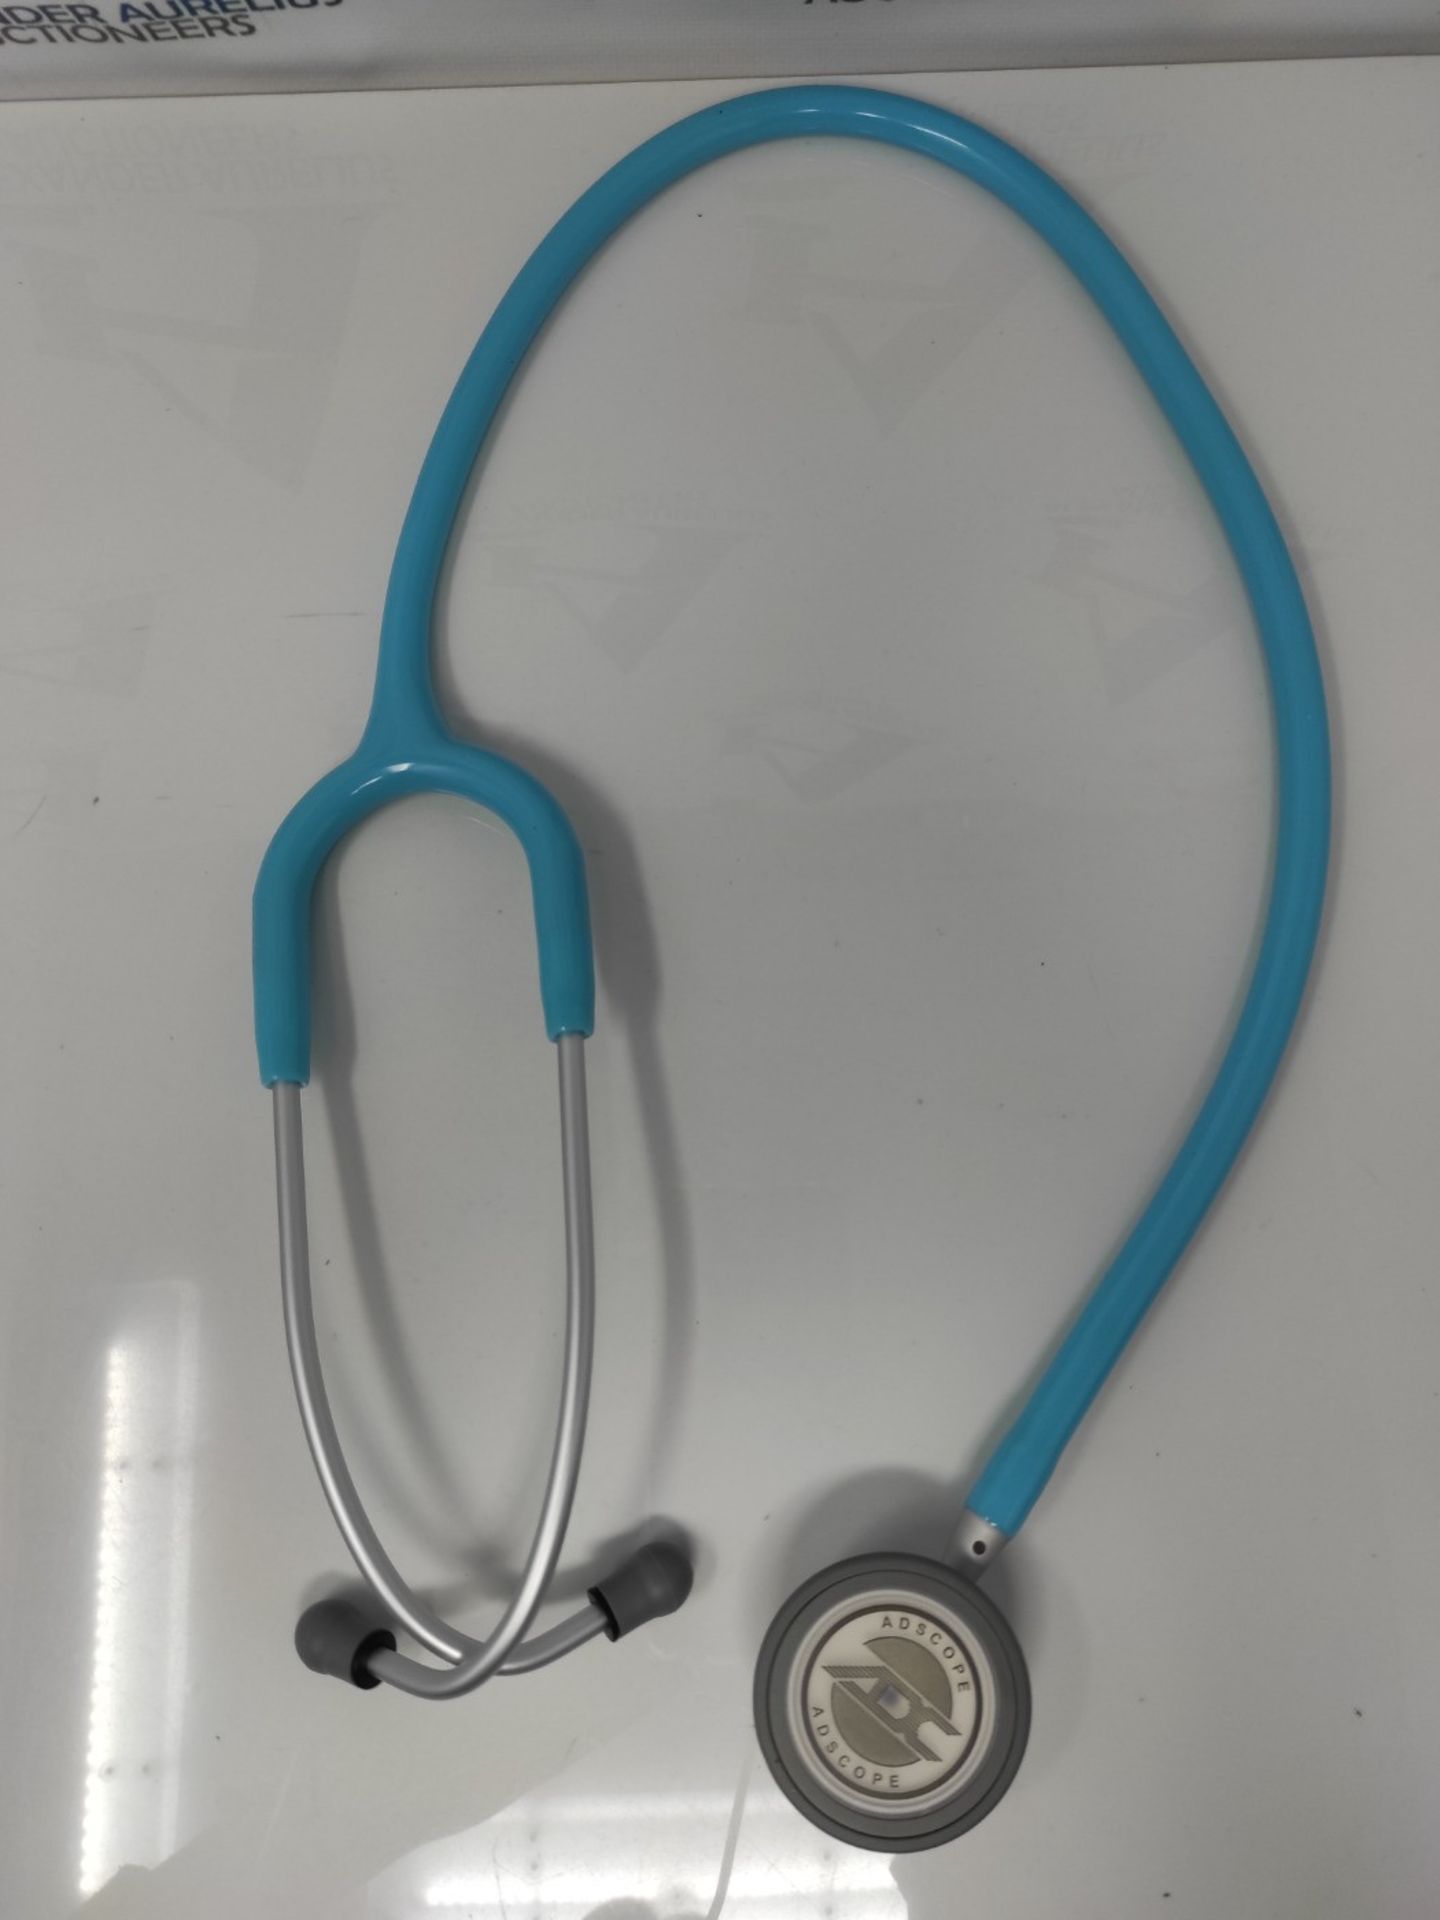 Adscope 619 - Ultra-lite Clinical Stethoscope - Turquoise - Image 2 of 2